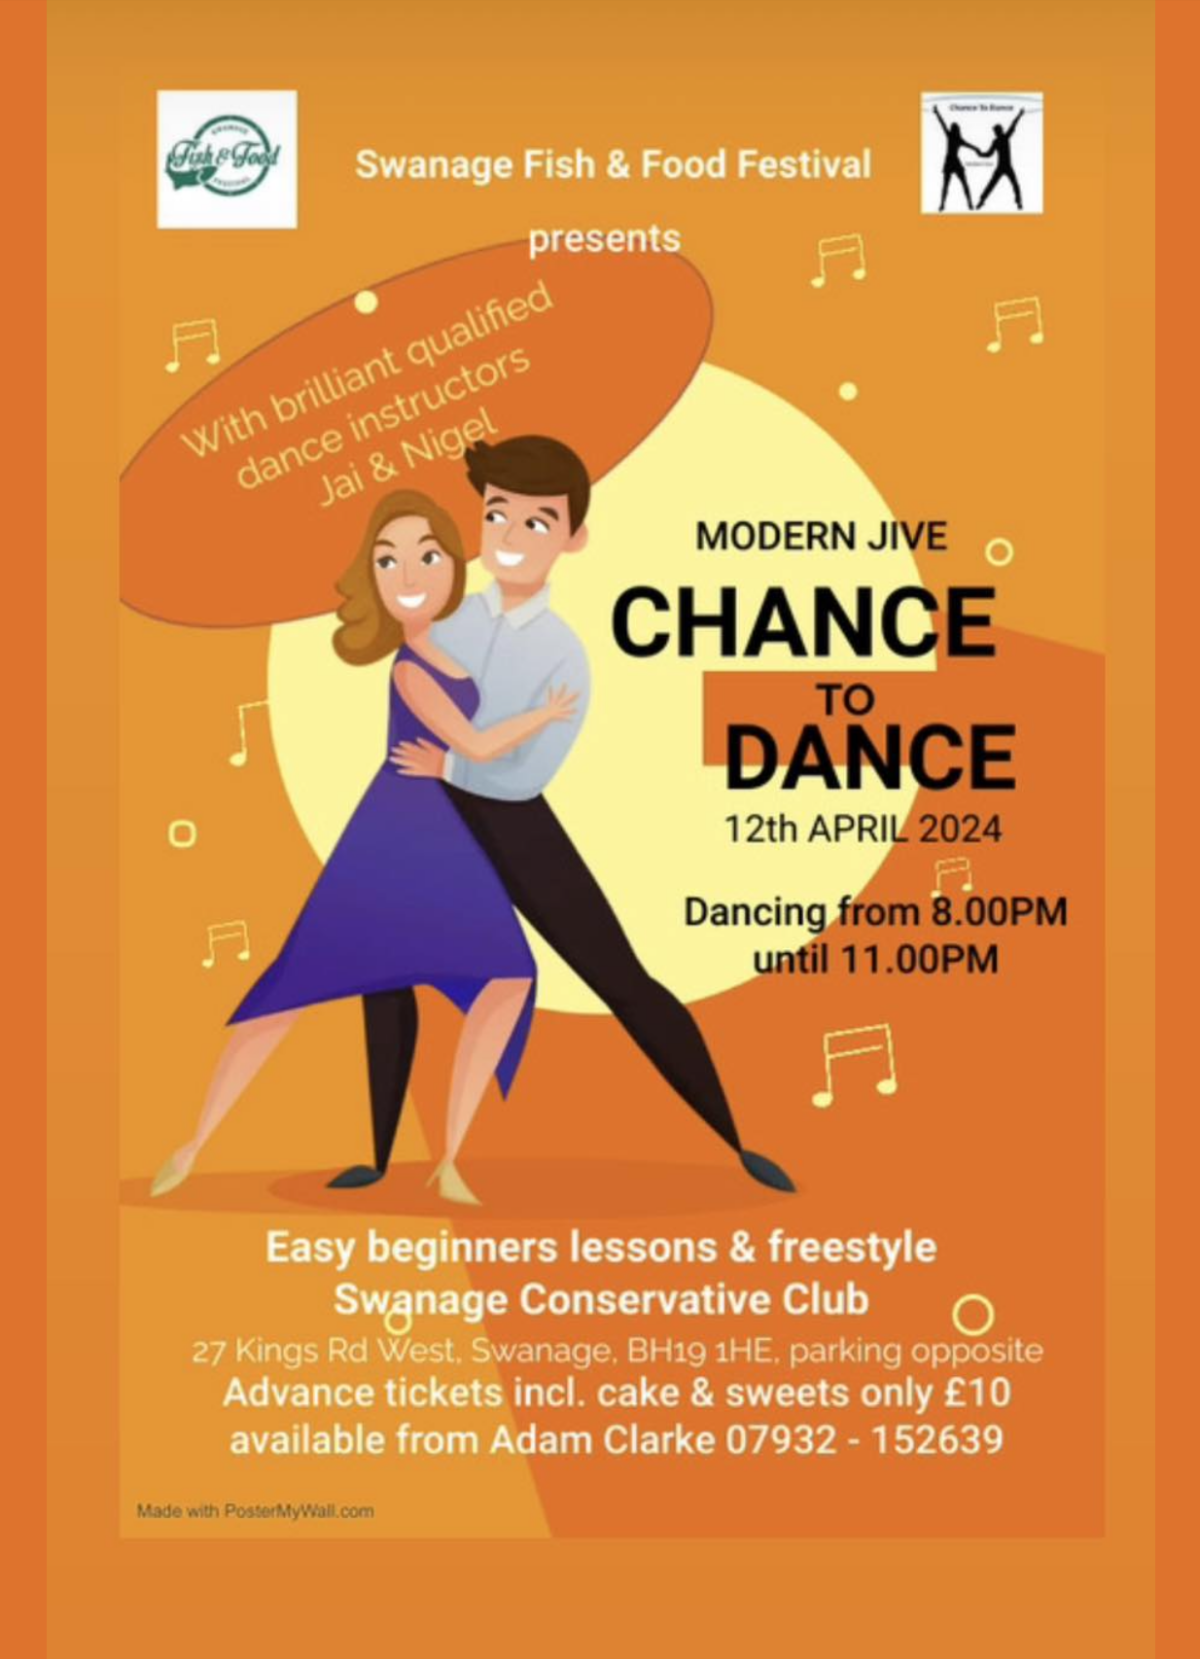 A Chance to Dance modern jive in Swanage poster